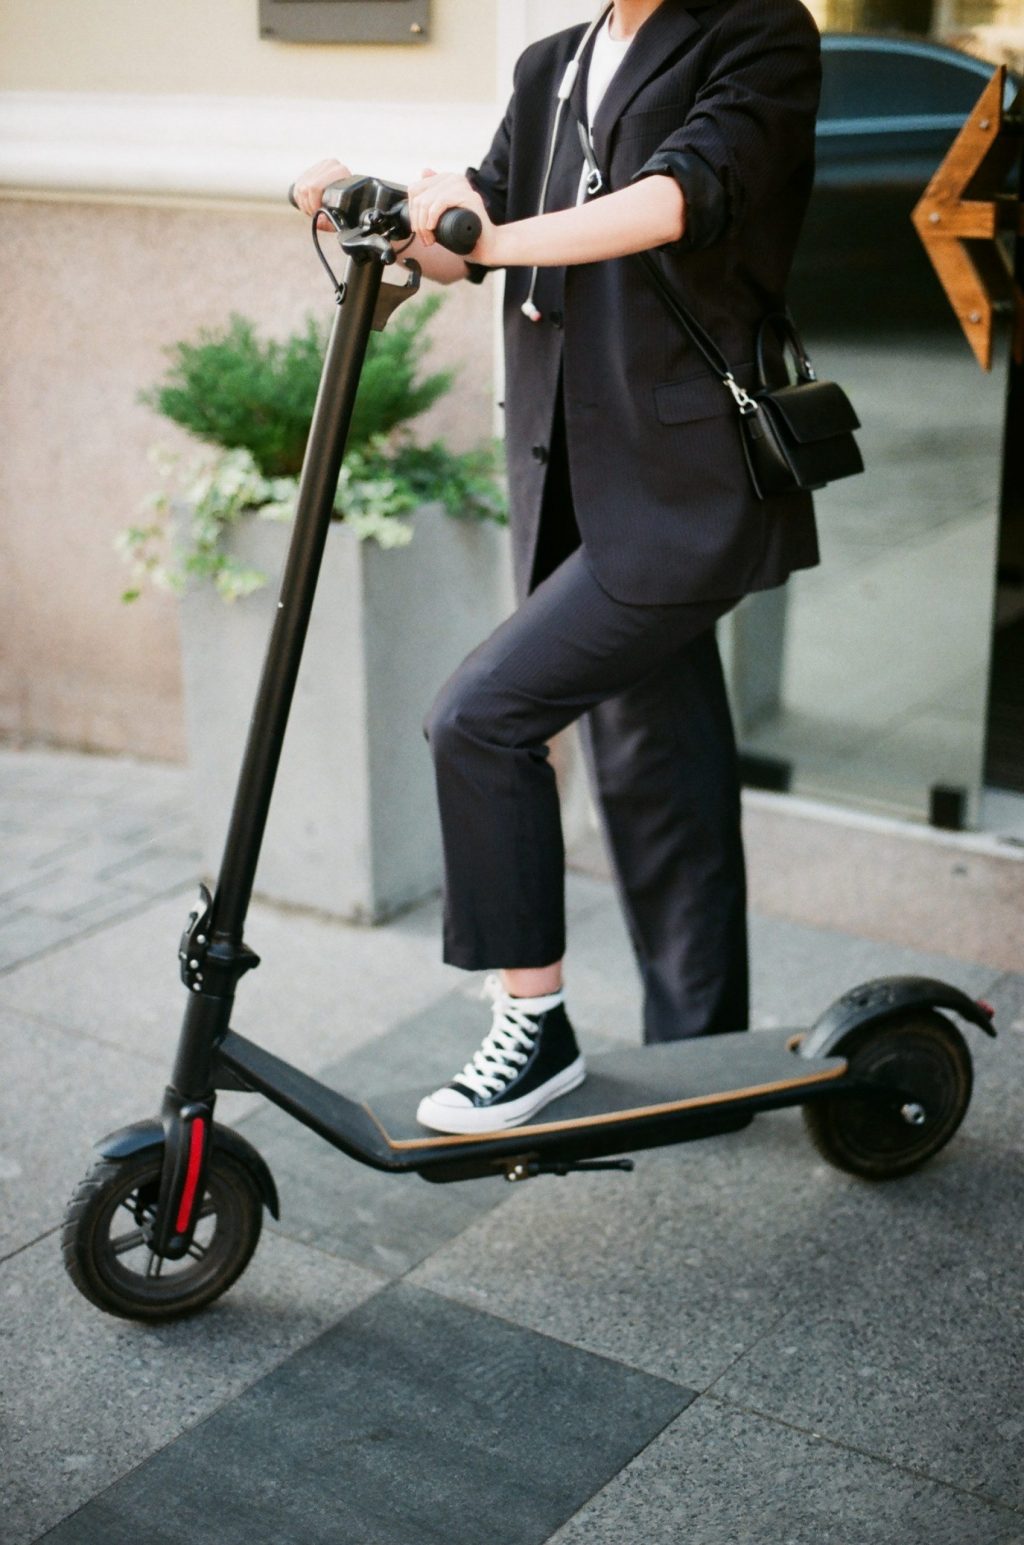 woman wearing office suit and converse stepping on scooter